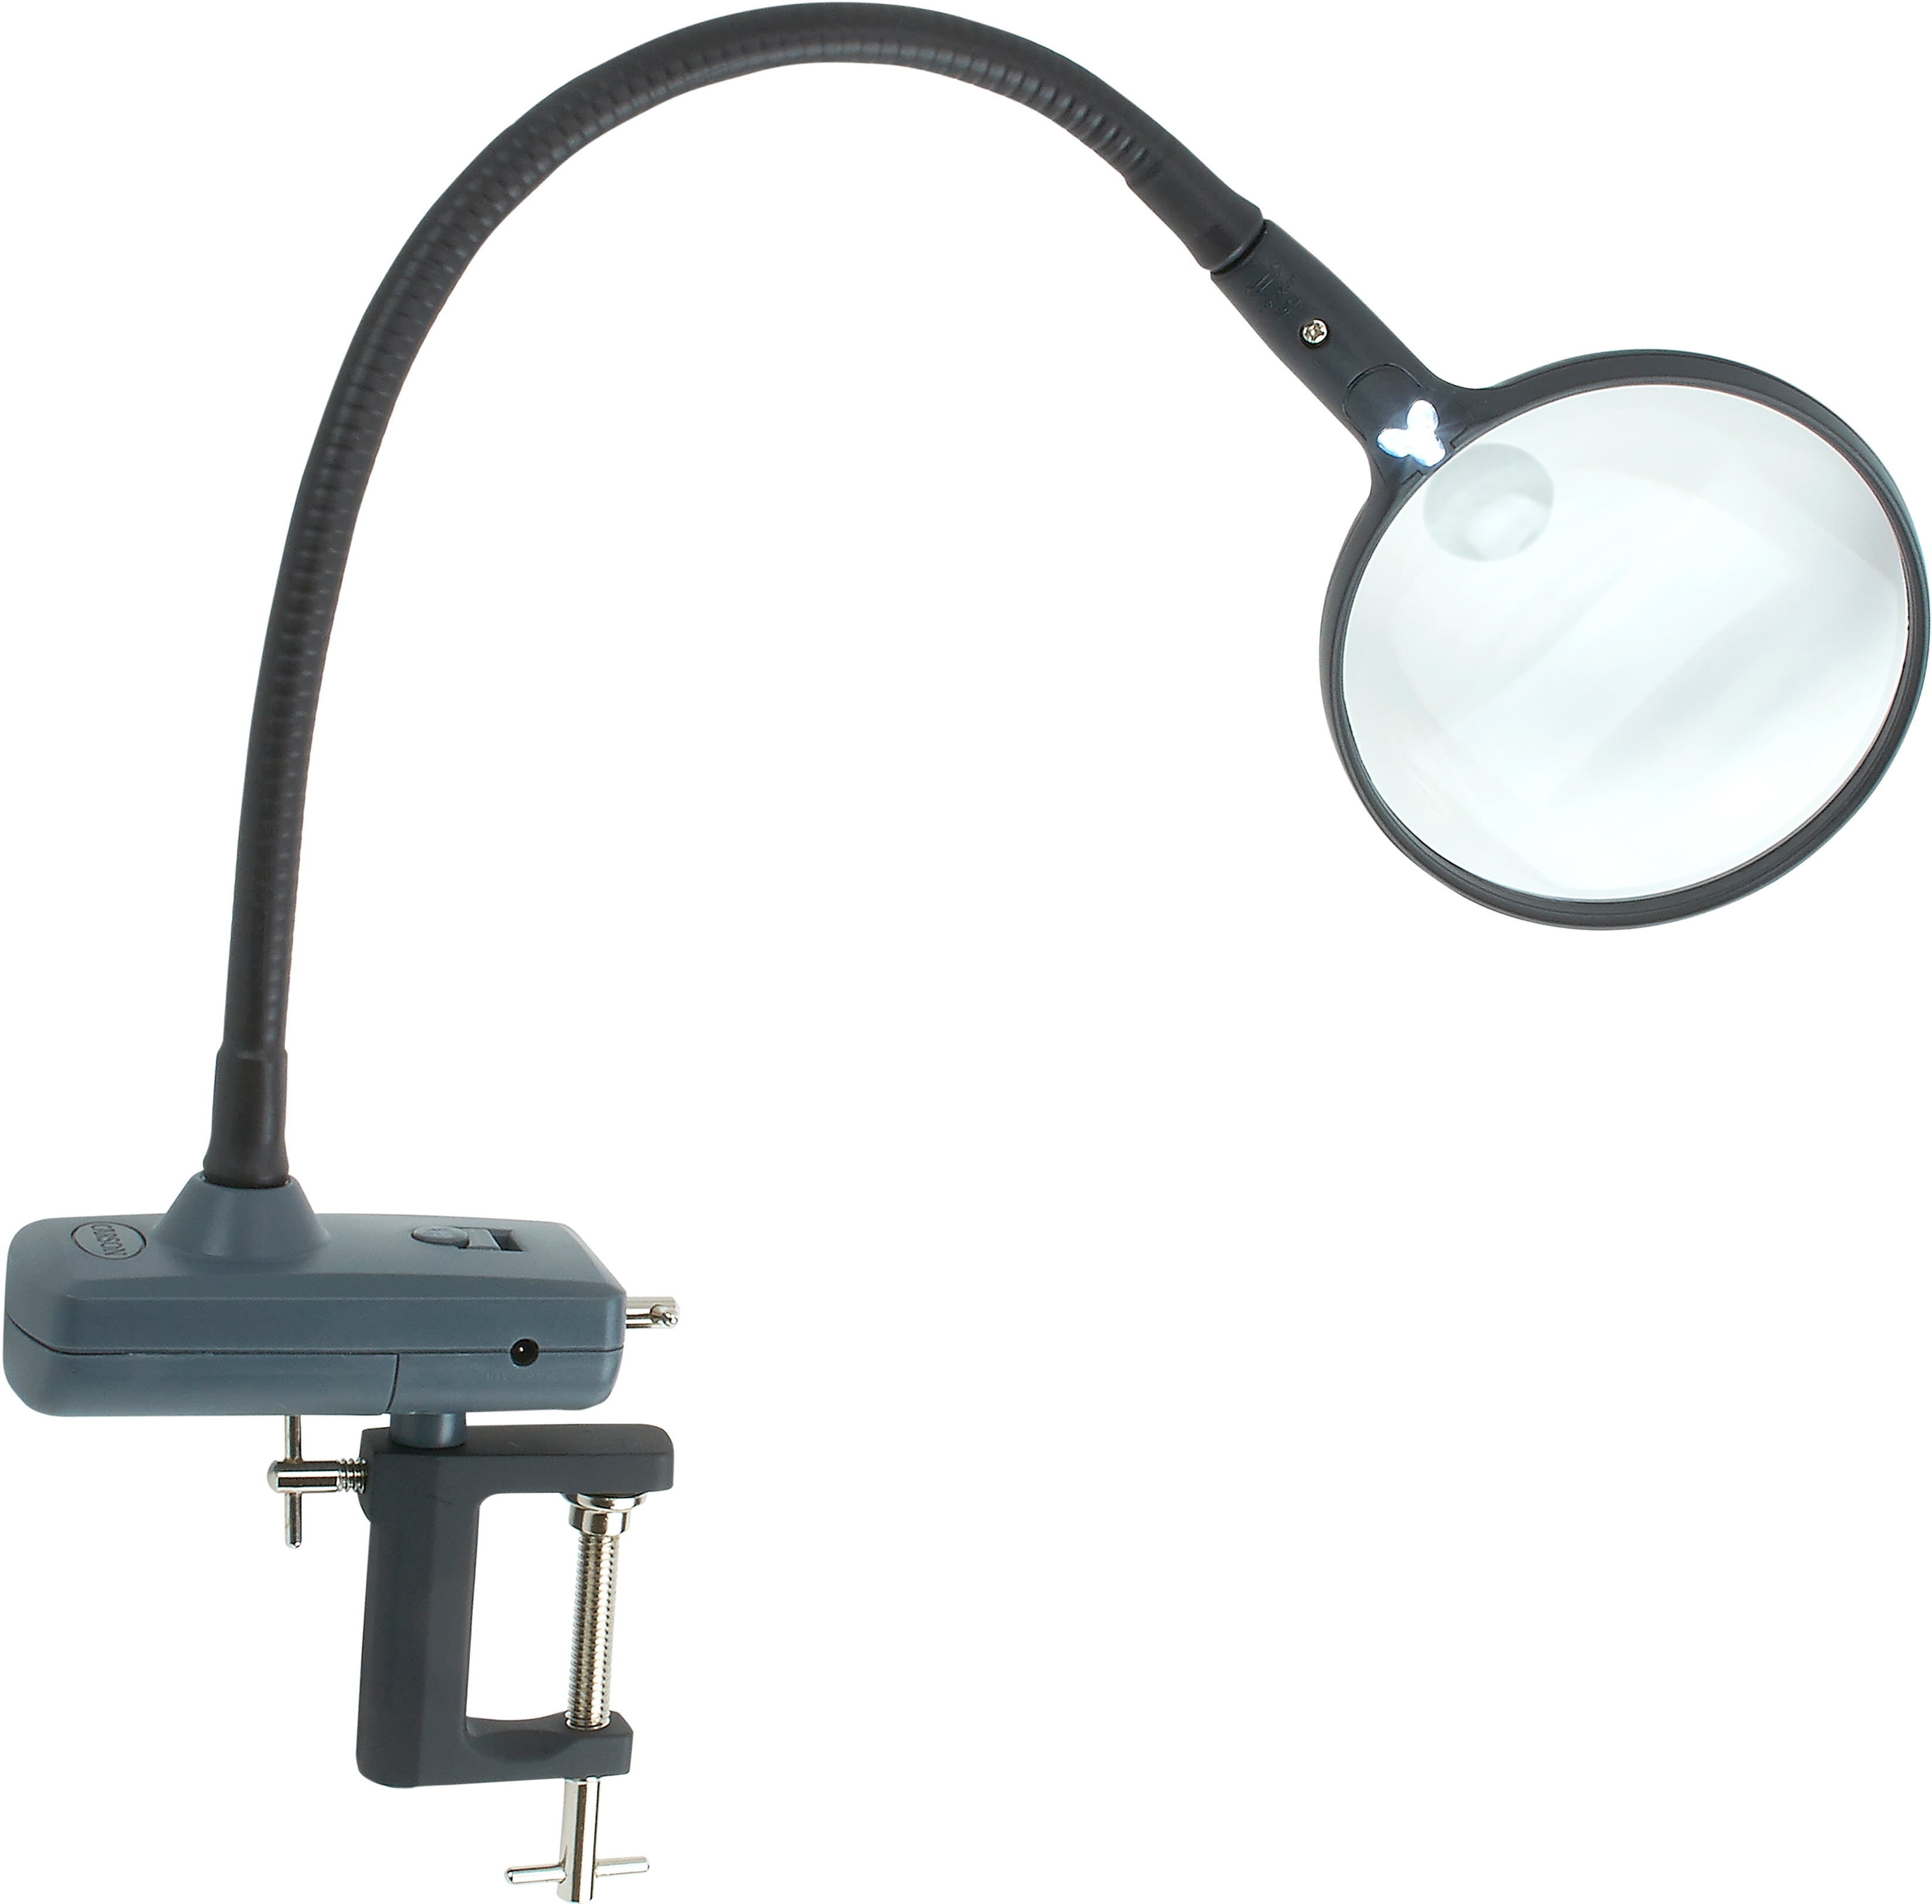 Carson GN-88 2x HelpingHands LED Lighted Magnifier